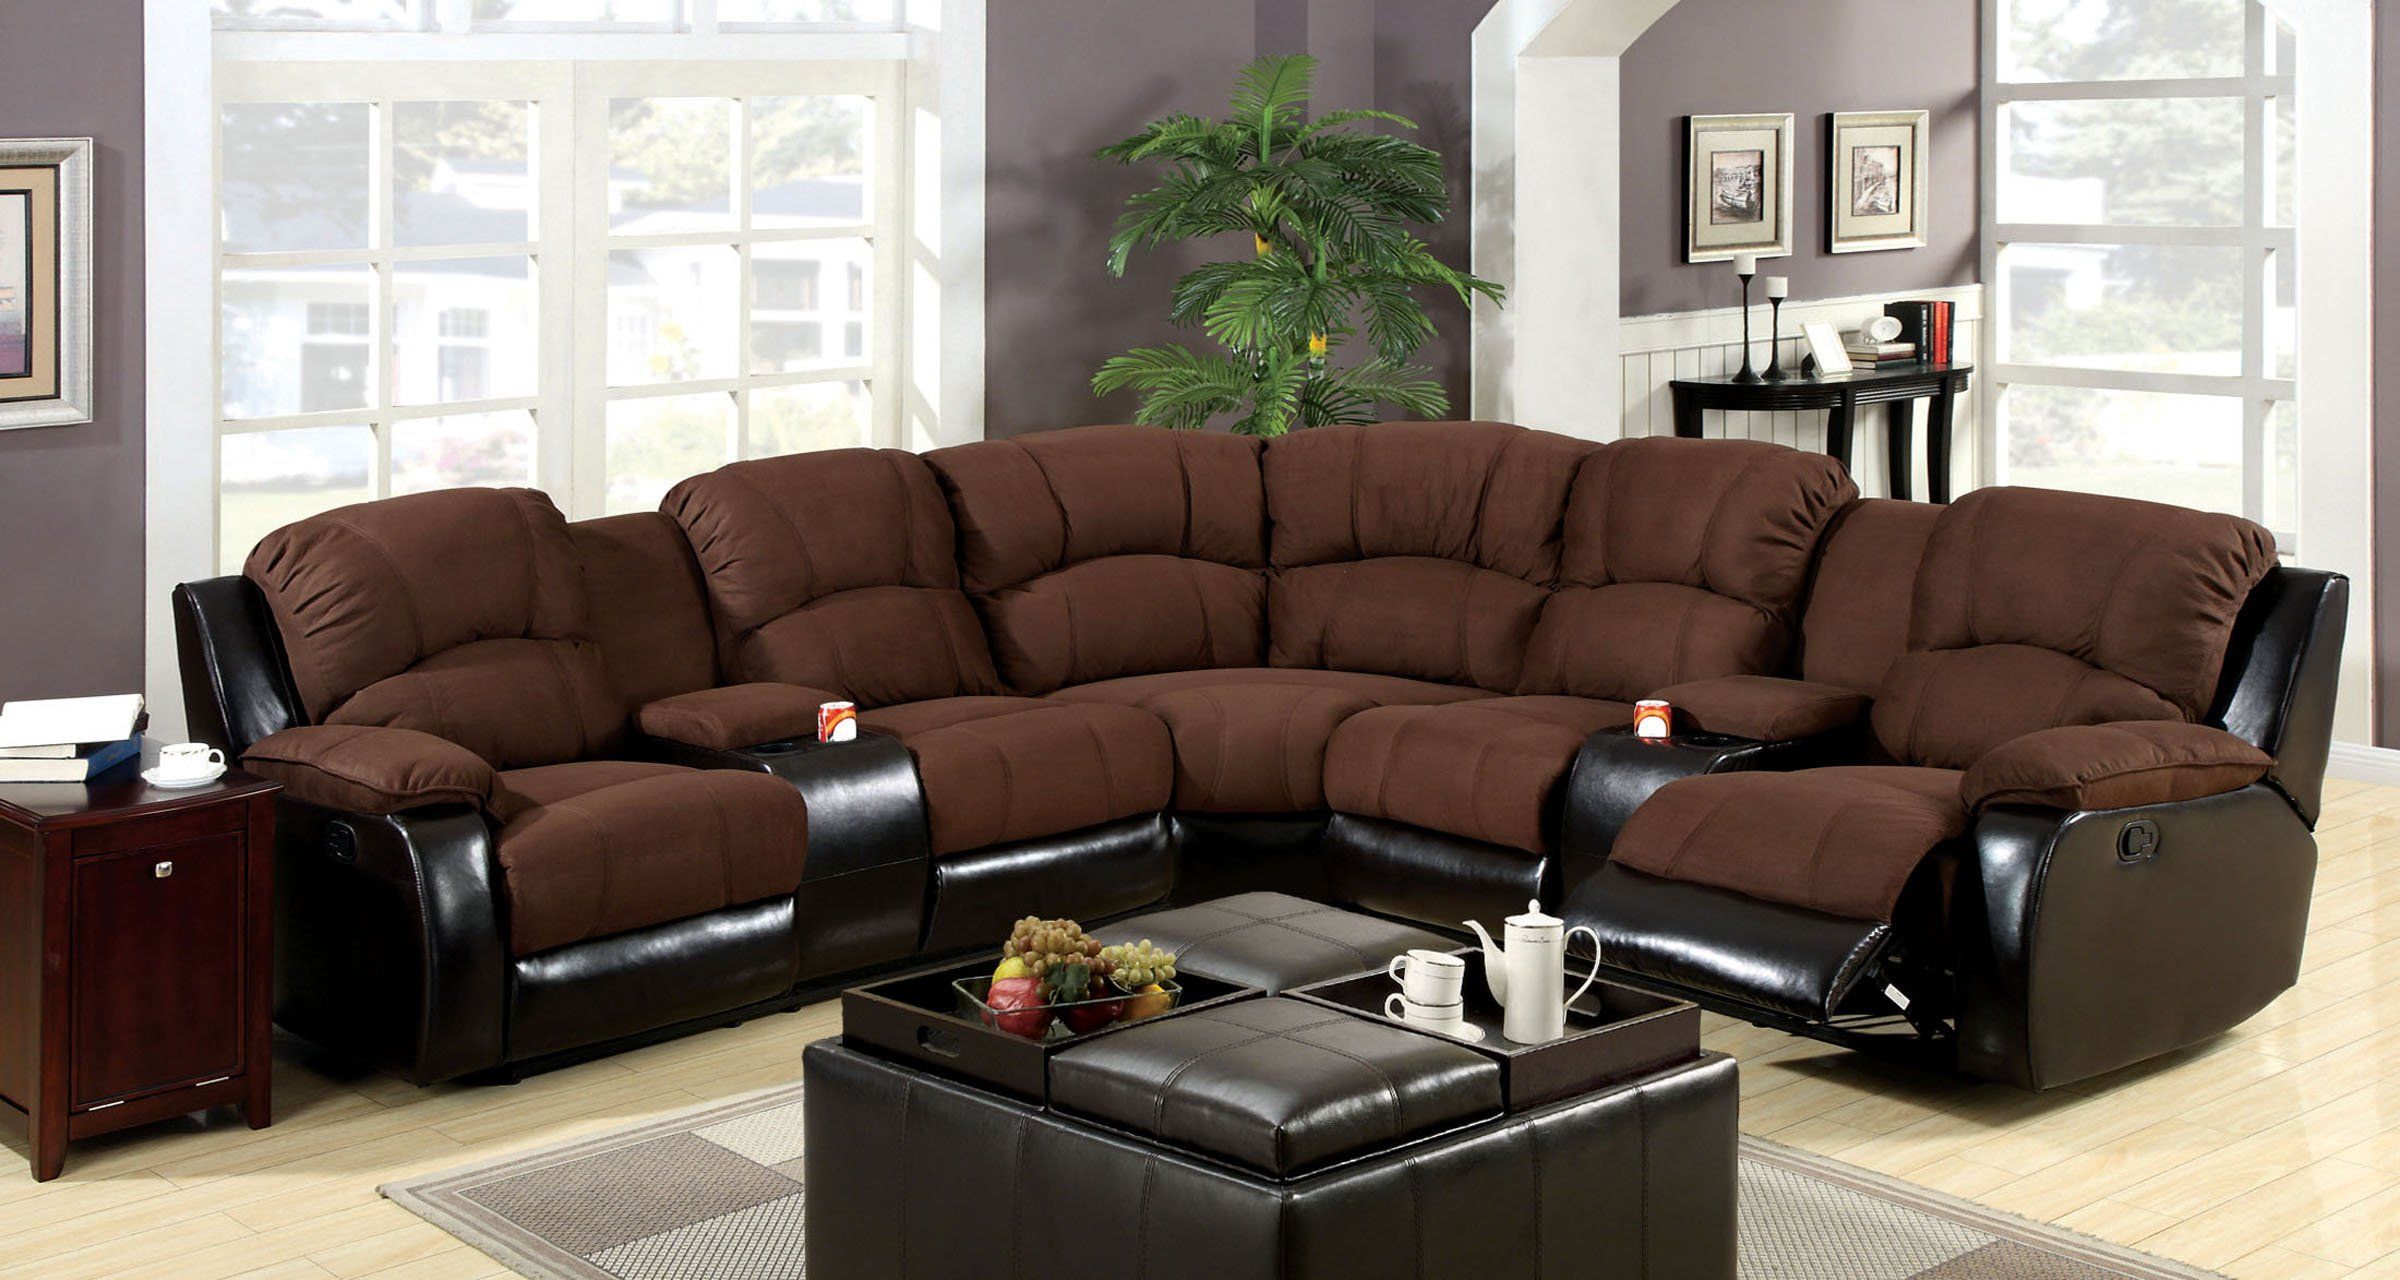 Wolcott Cm6557 Transitional Two Tone 2 Recliners Sectional Sofa Couch With Regard To 2 Tone Chocolate Microfiber Sofas (Gallery 18 of 20)